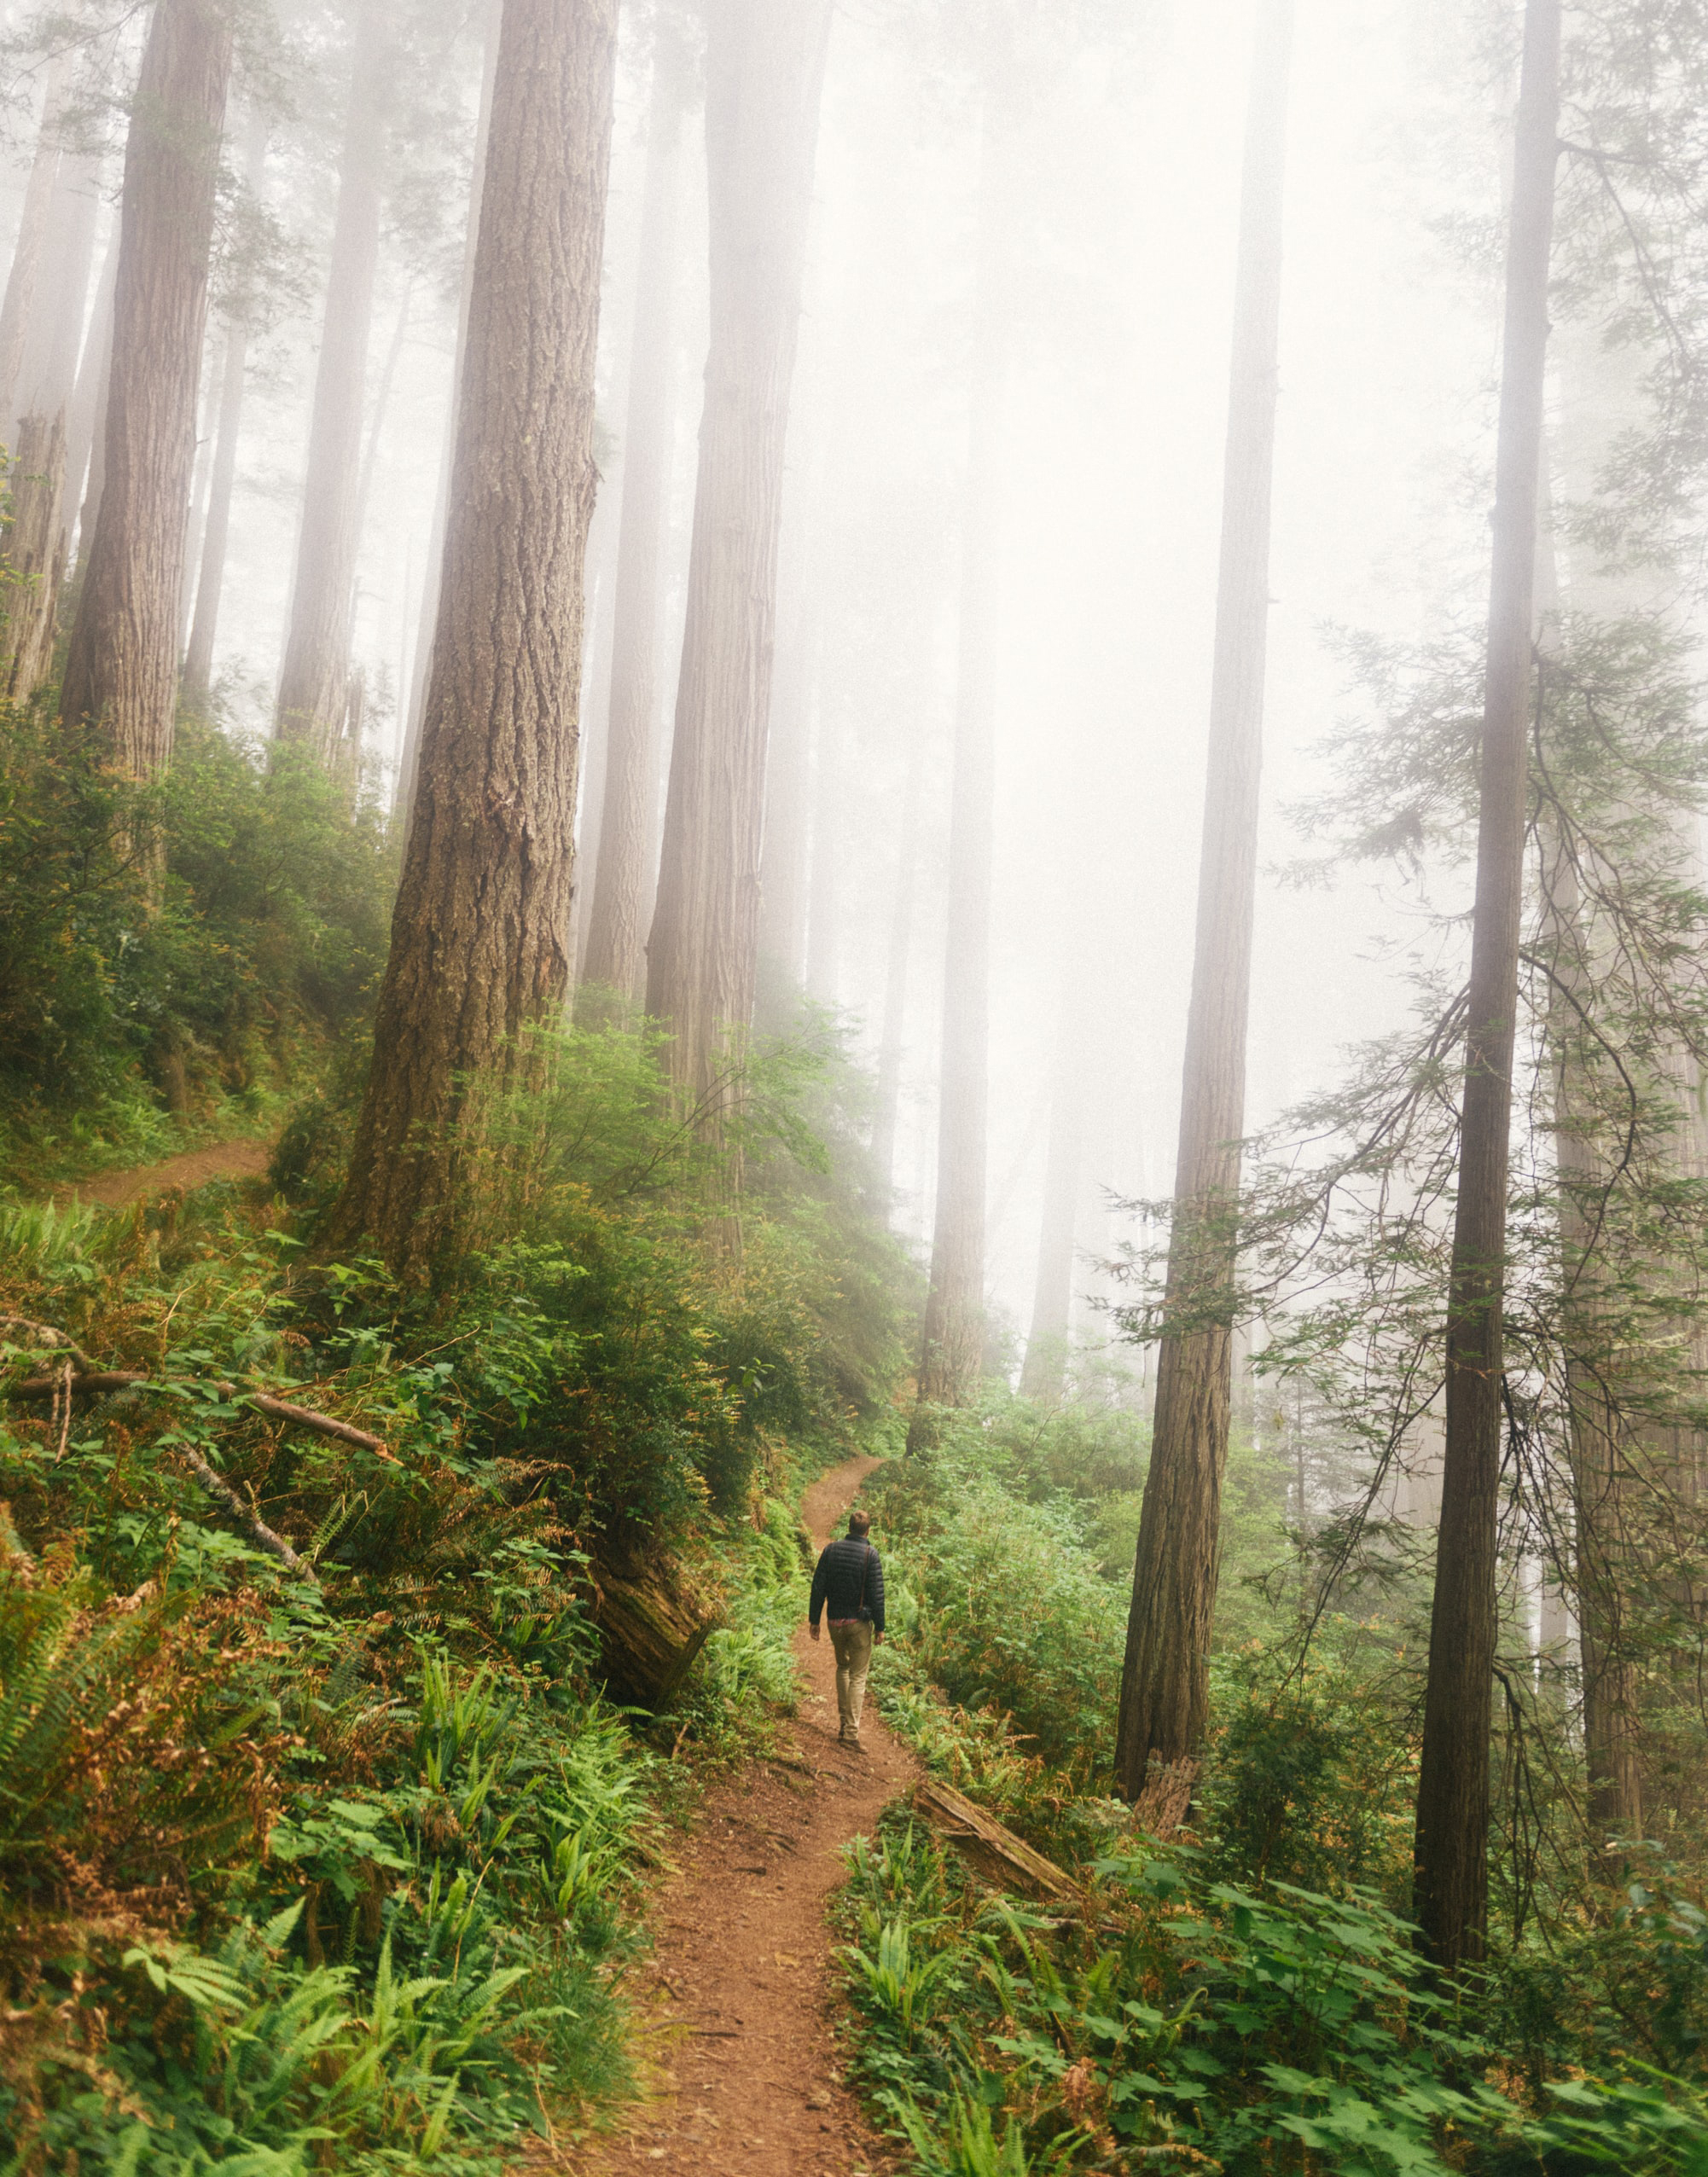 A lone hiker walks a trail through towering trees in the mist